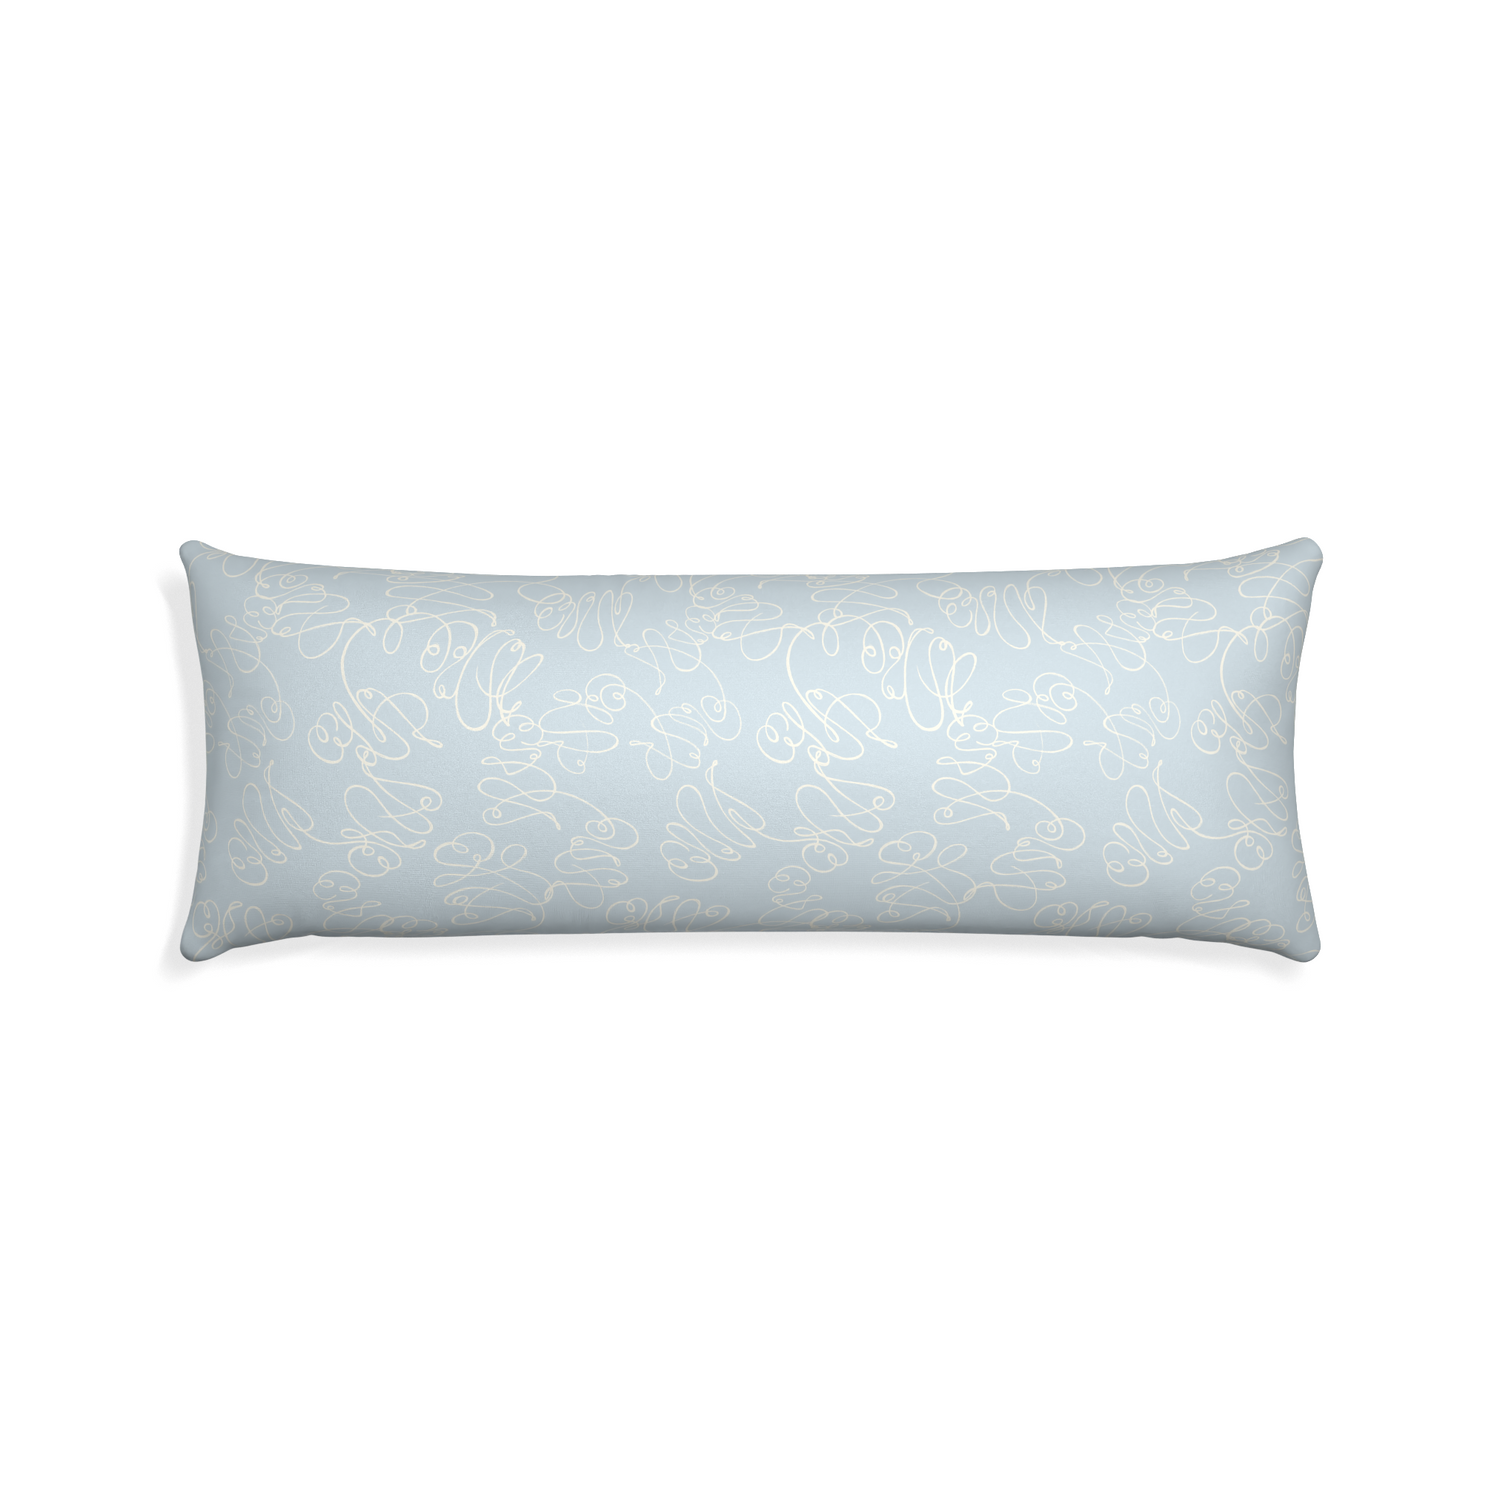 Xl-lumbar mirabella custom pillow with none on white background